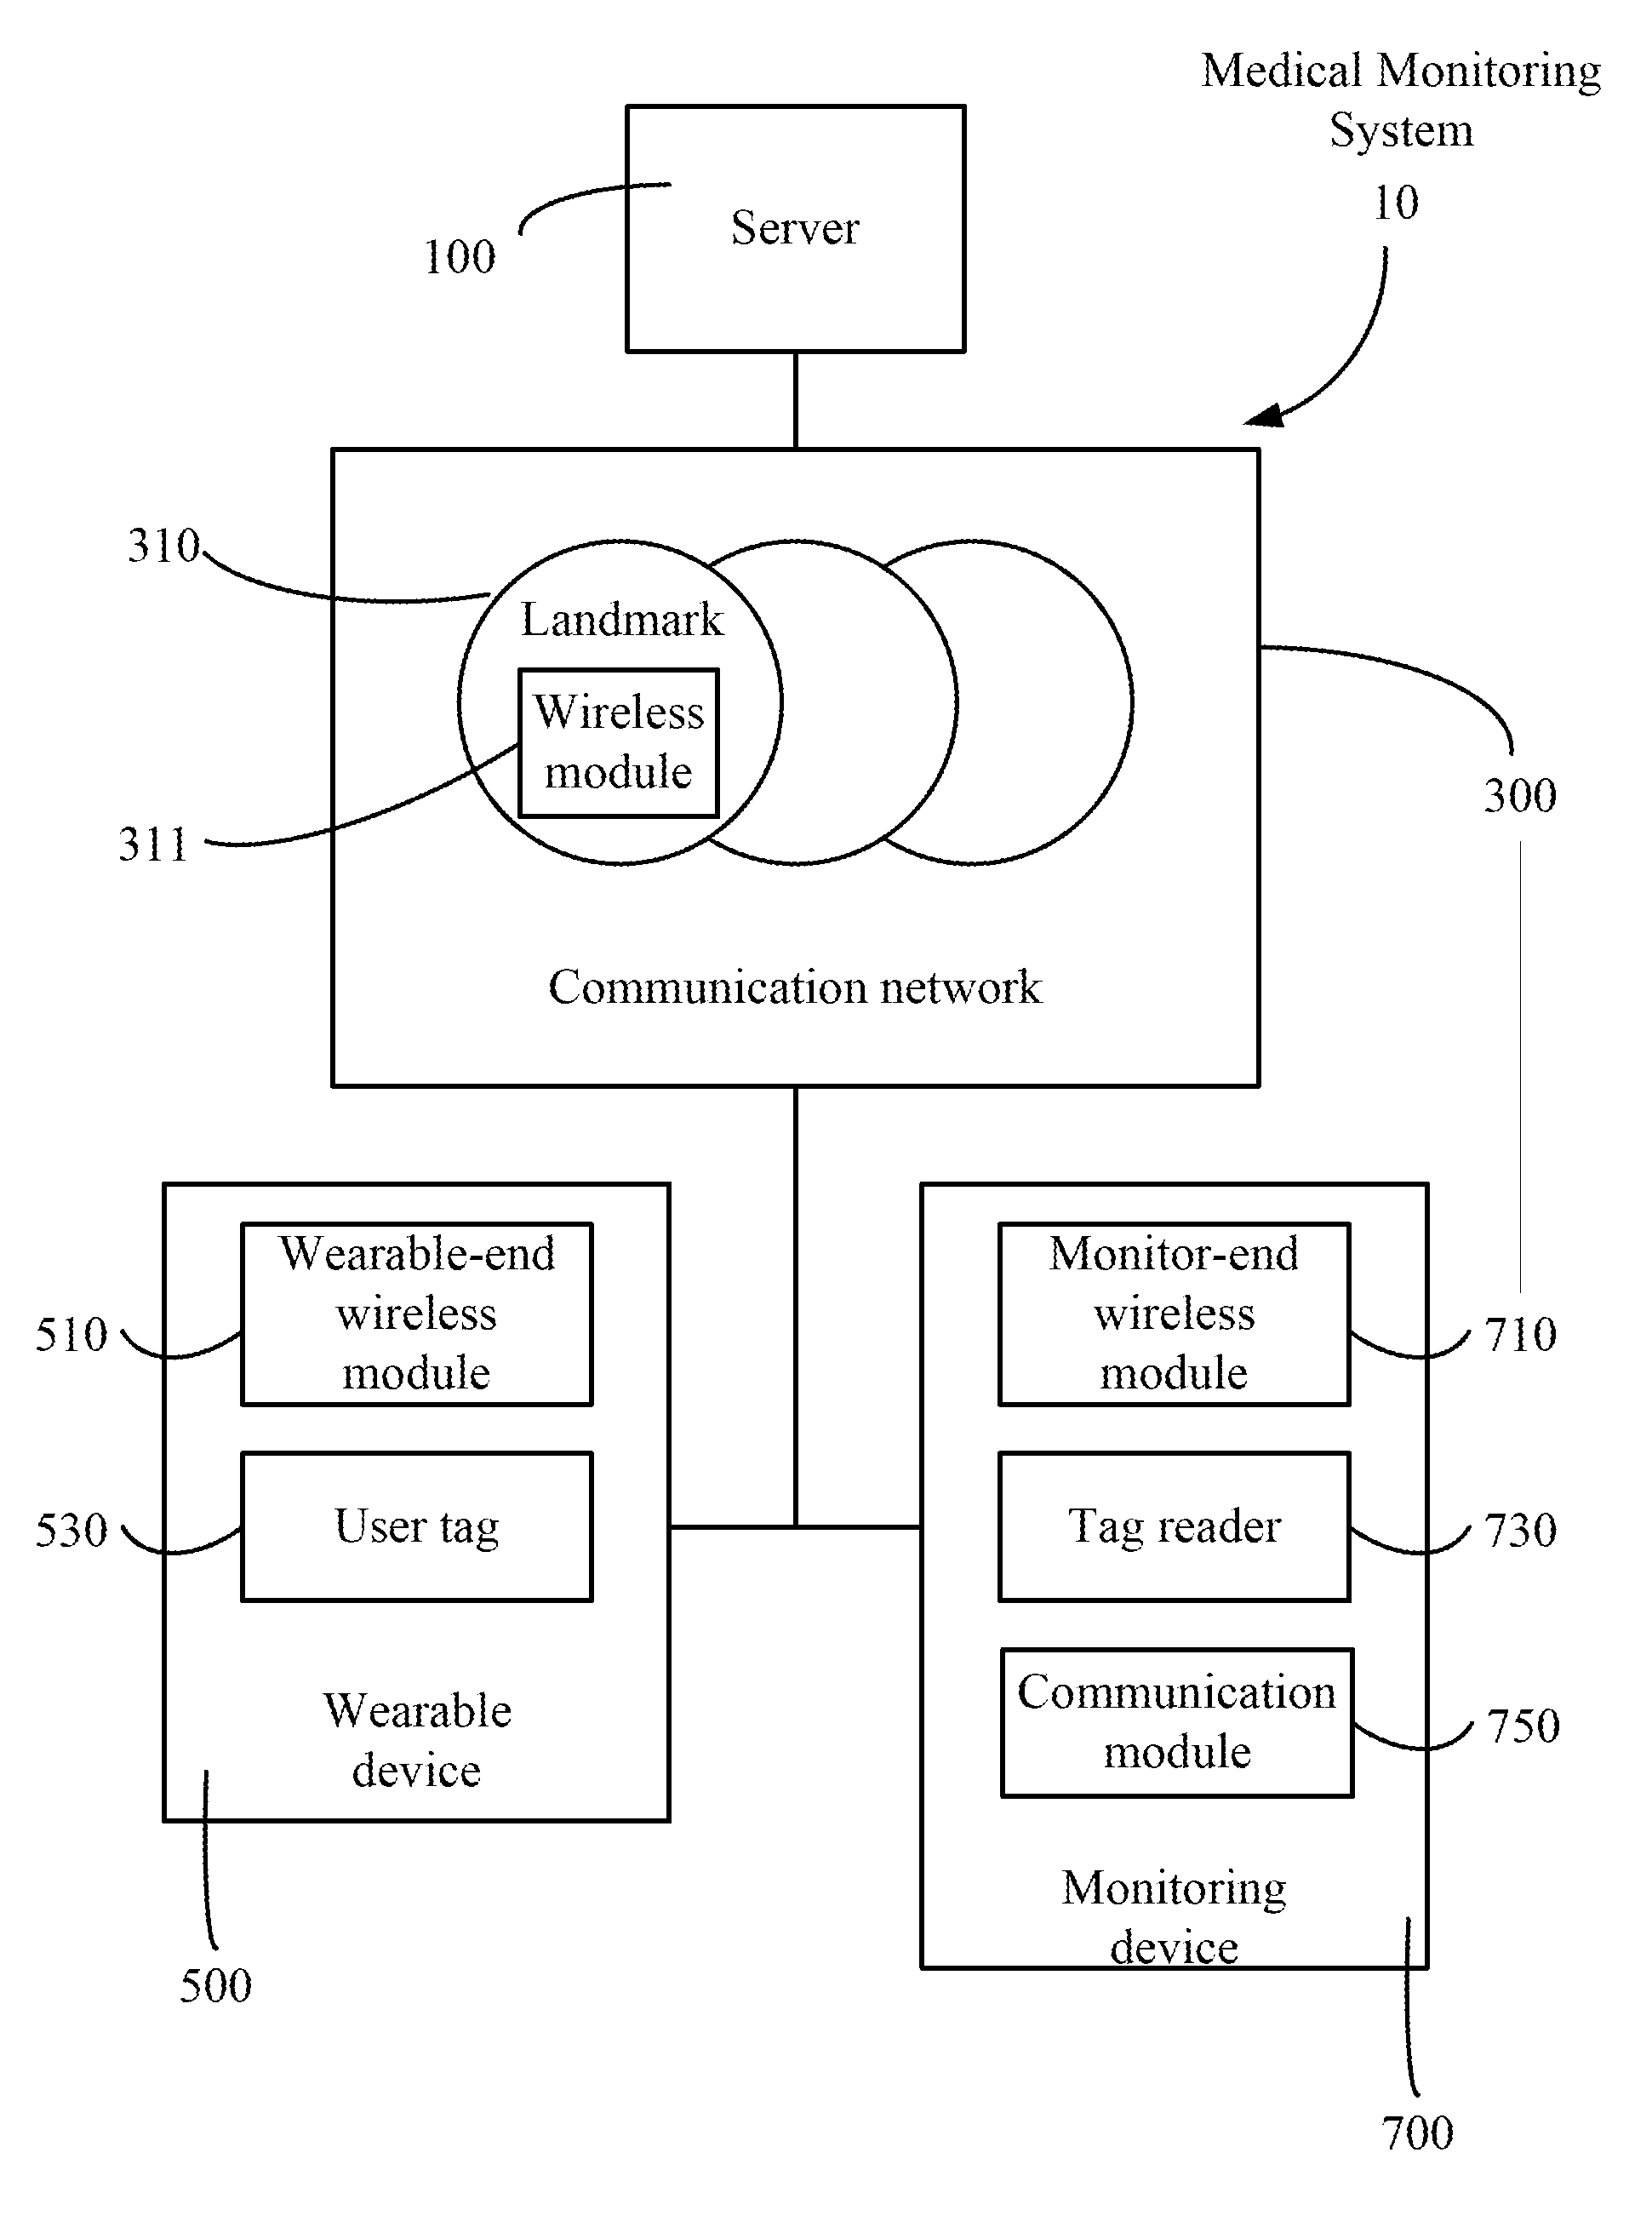 System and device for medical monitoring